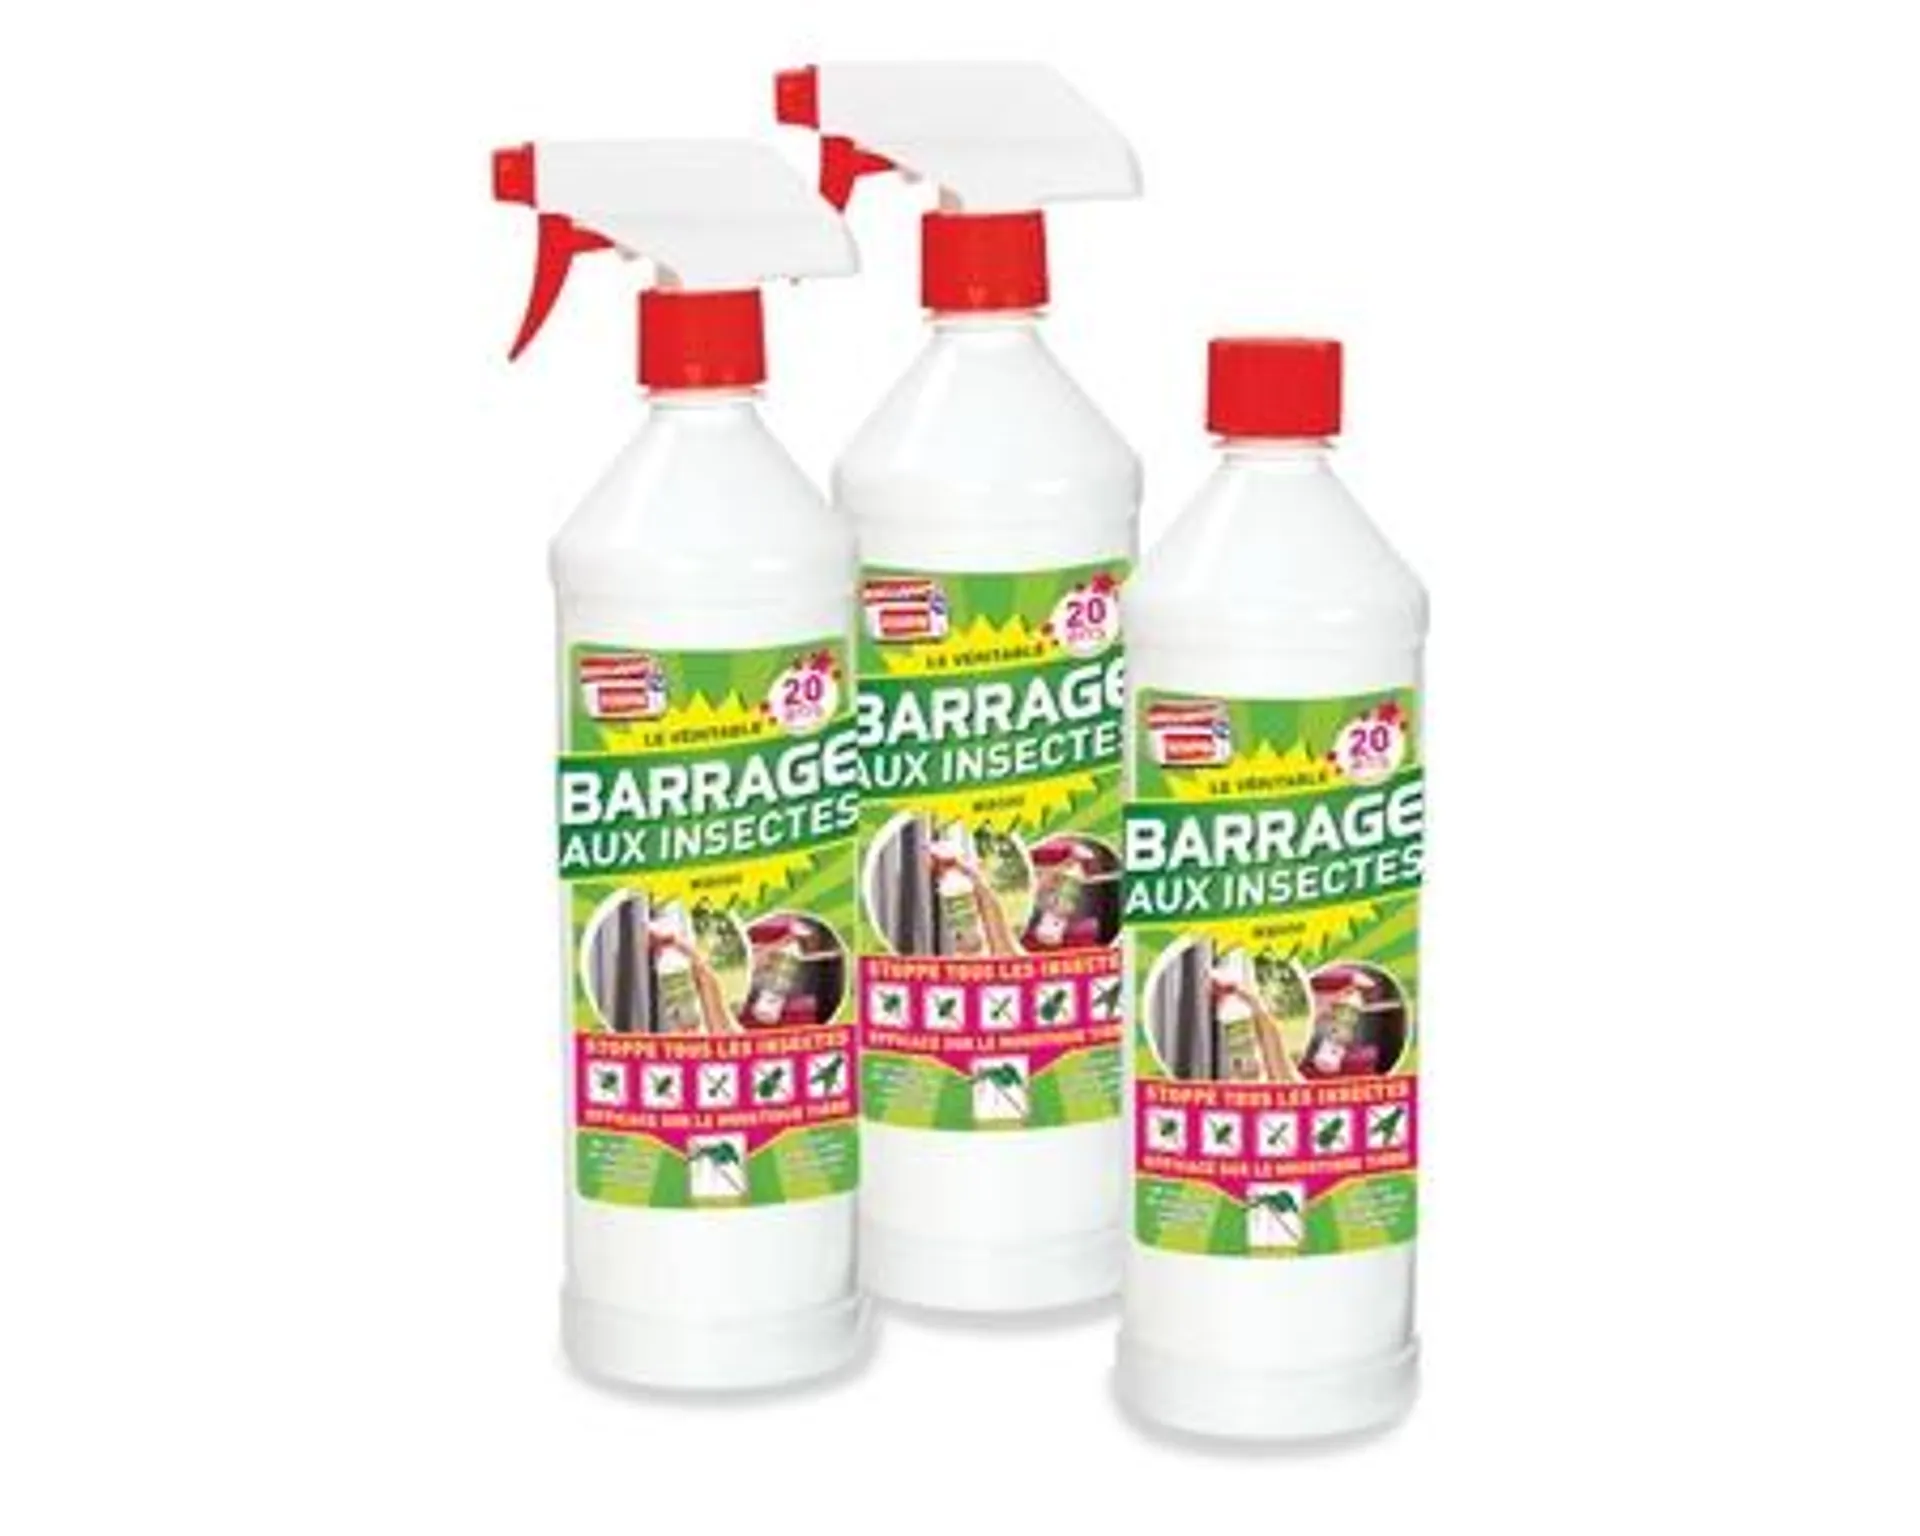 Barrage aux insectes x3 - Insecticide